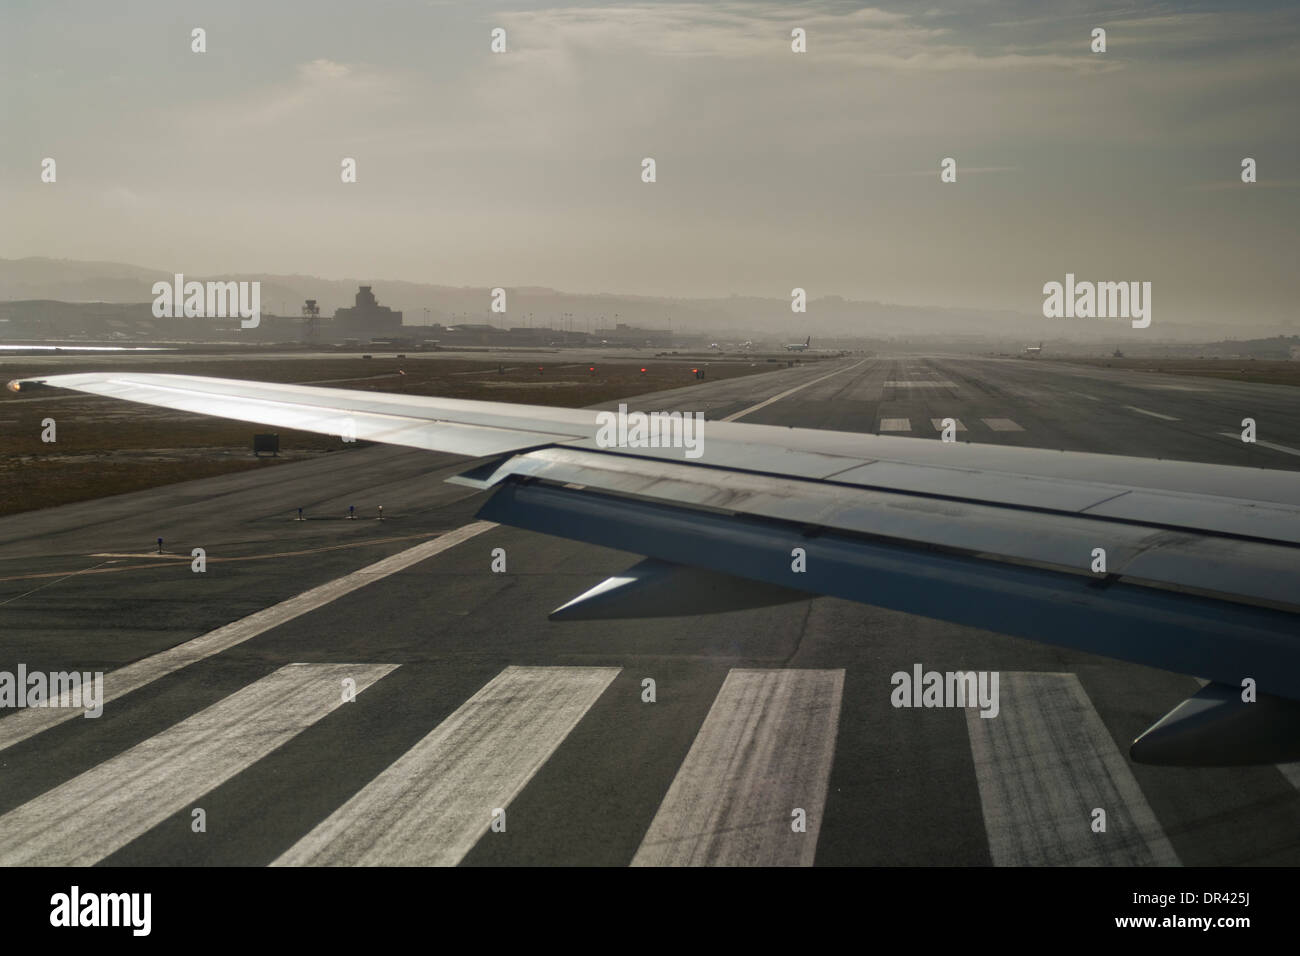 Turning onto the runway for takeoff from San Francisco International Airport (SFO), California Stock Photo